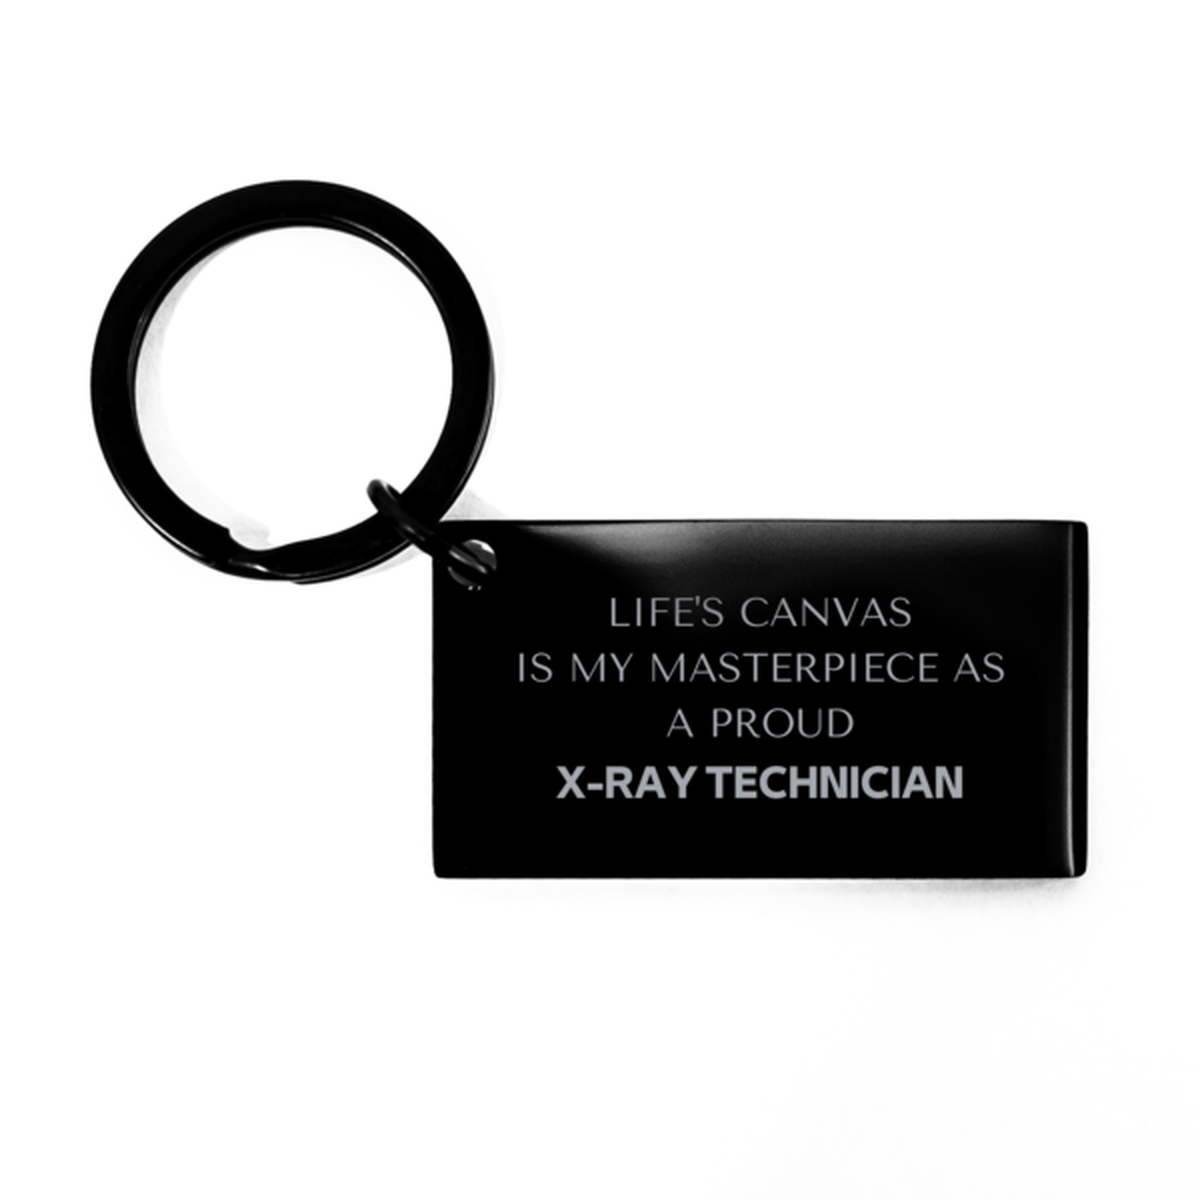 Proud X-Ray Technician Gifts, Life's canvas is my masterpiece, Epic Birthday Christmas Unique Keychain For X-Ray Technician, Coworkers, Men, Women, Friends